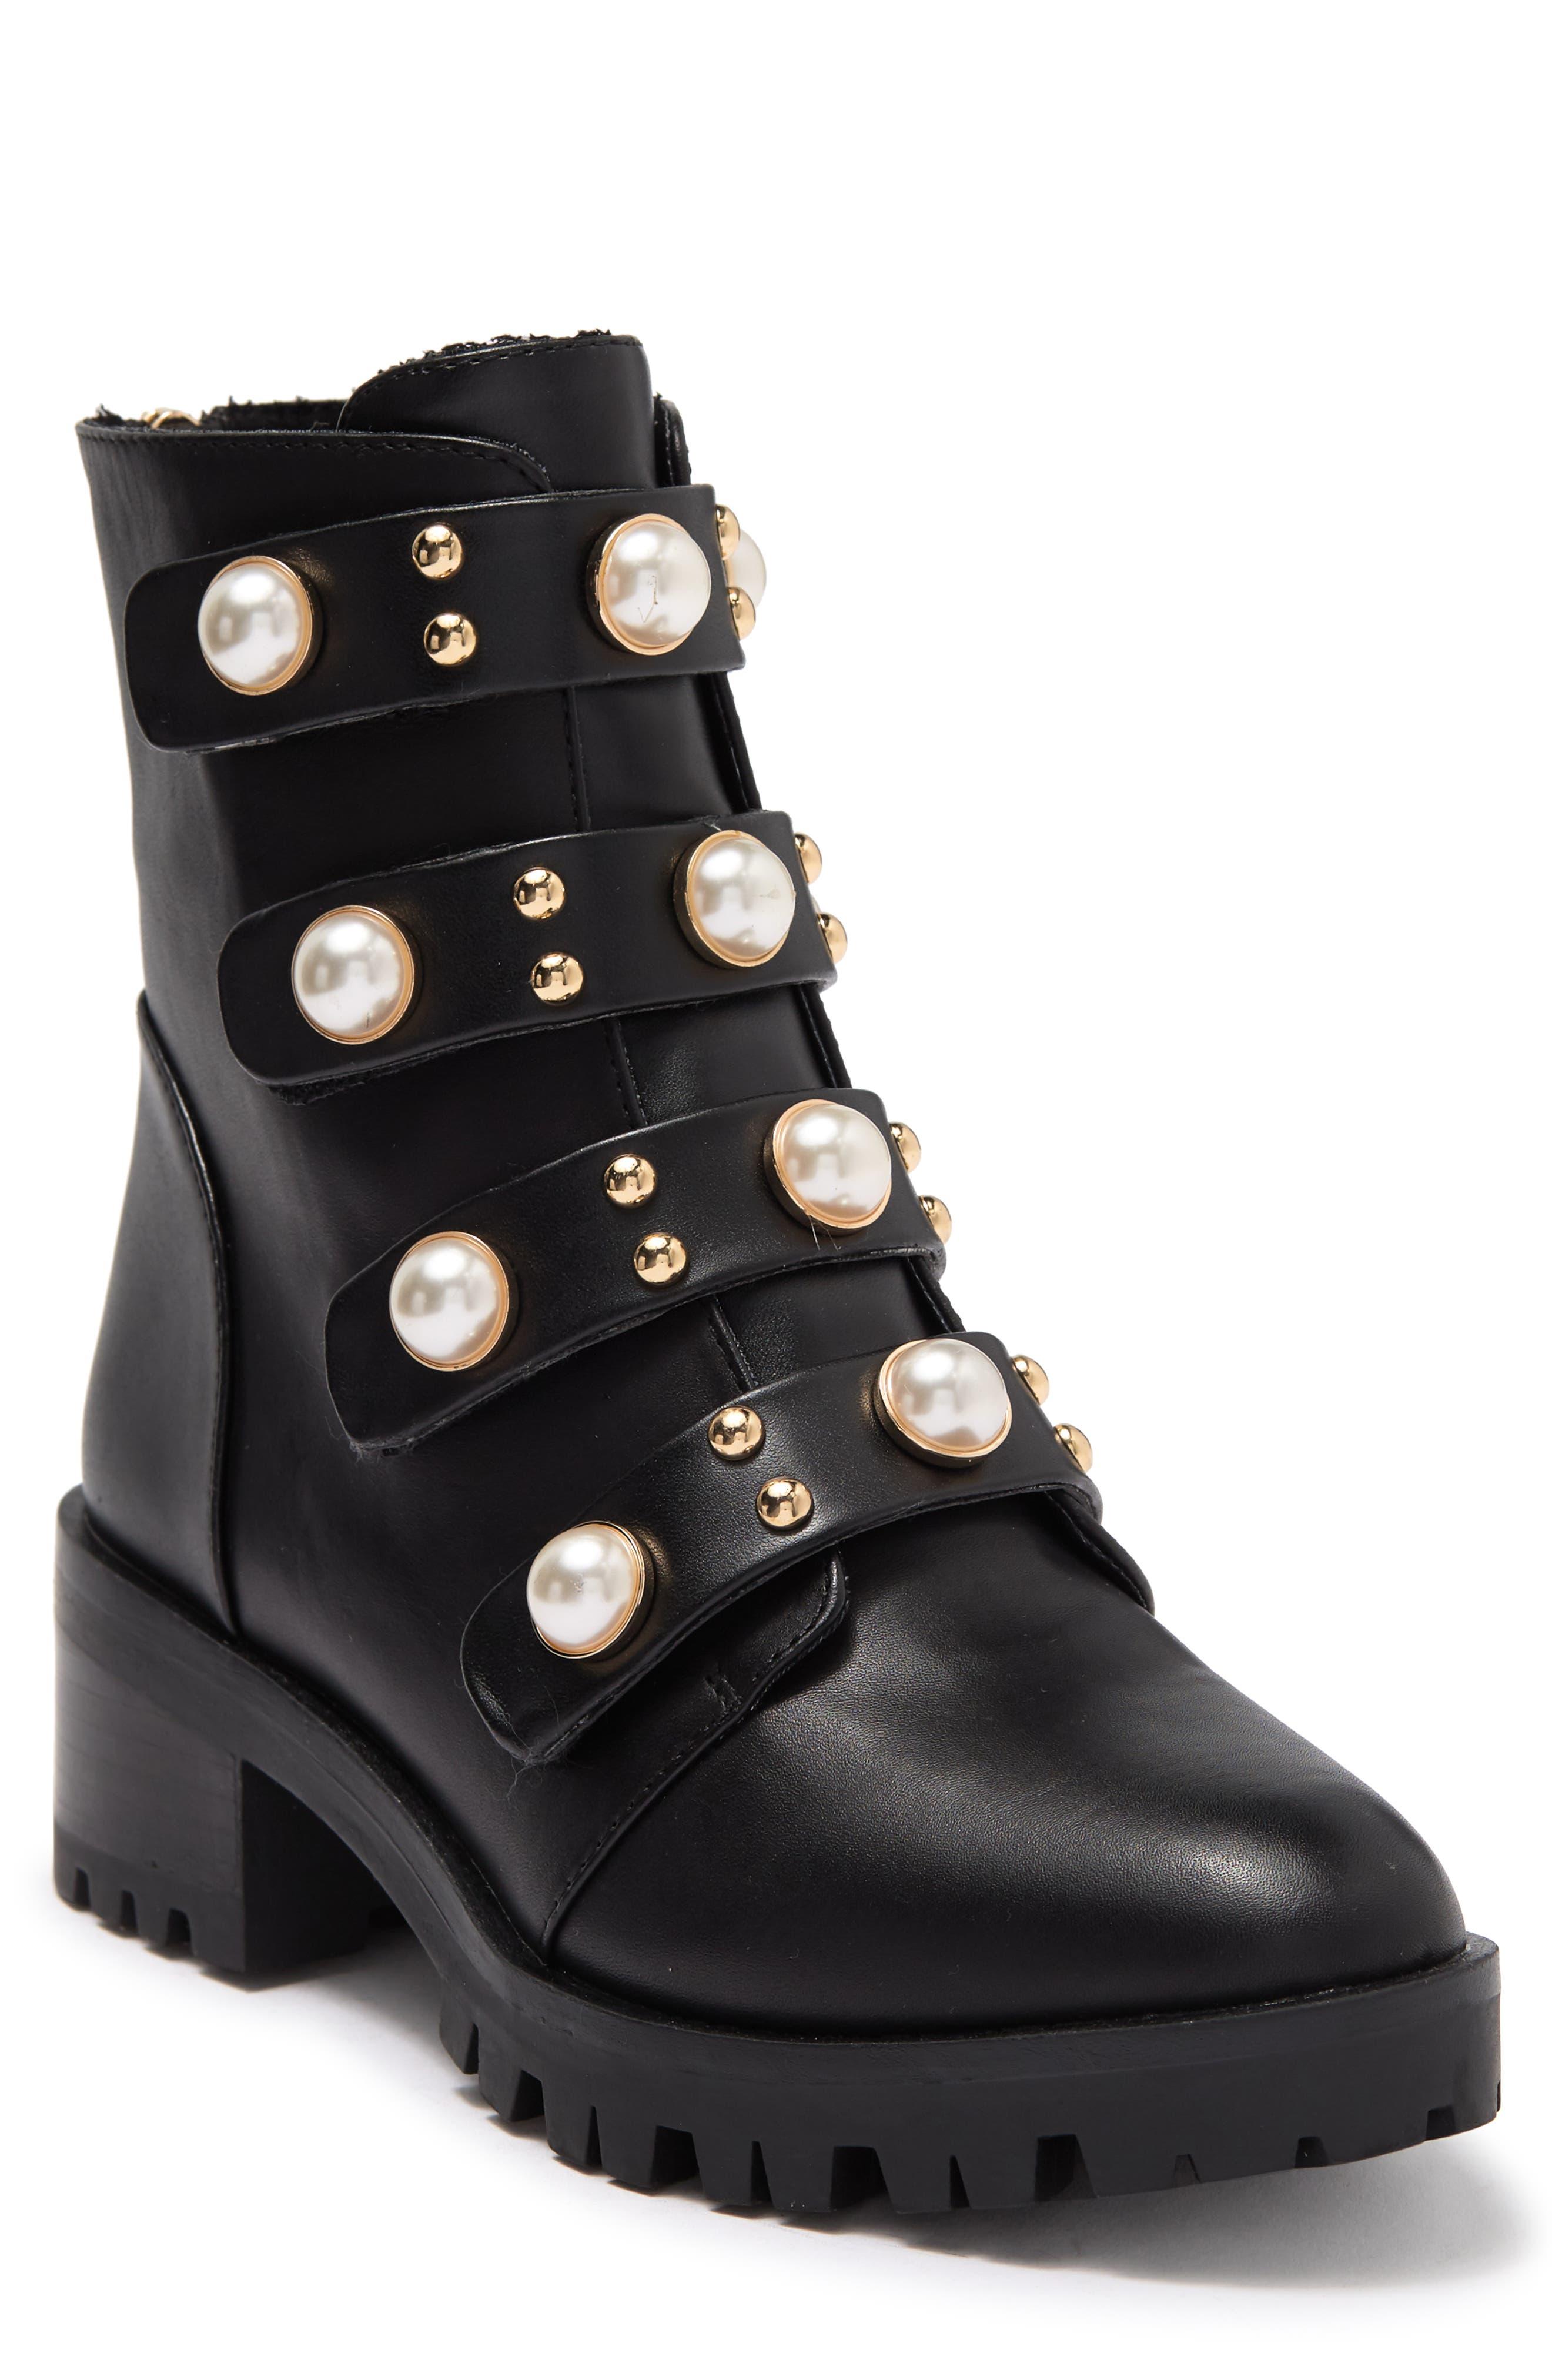 Karl Lagerfeld Penelope Studded Lug Sole Combat Boot in Black | Lyst